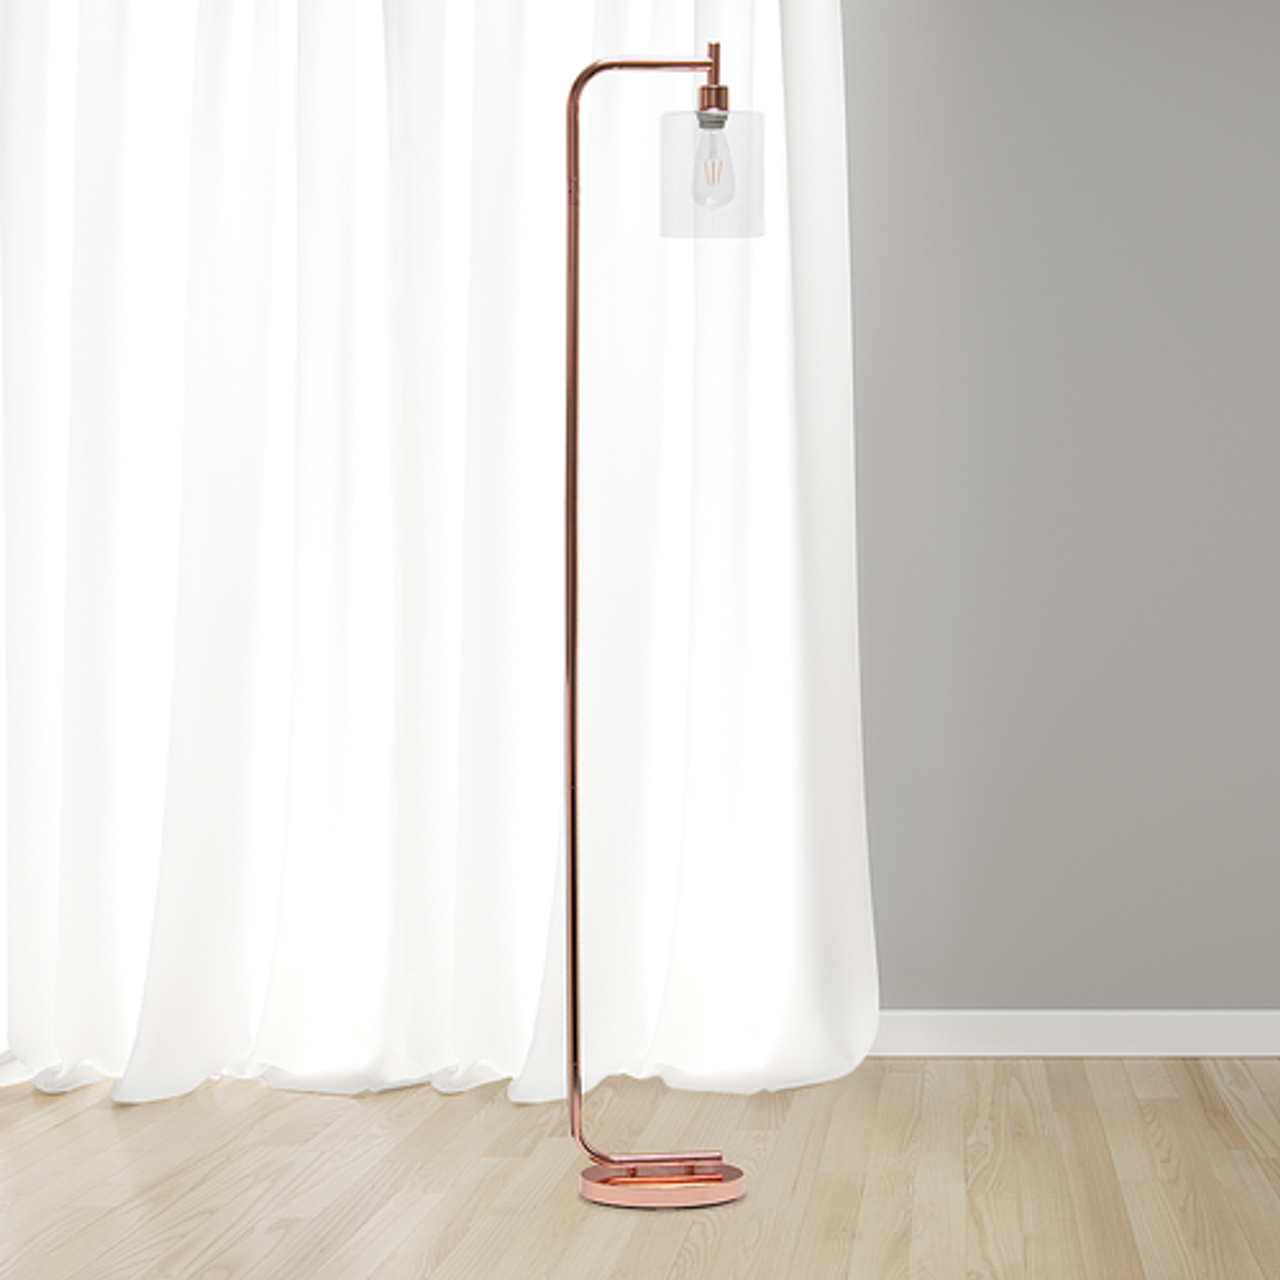 Simple Designs Modern Iron Lantern Floor Lamp with Glass Shade, Rose Gold - Rose Gold